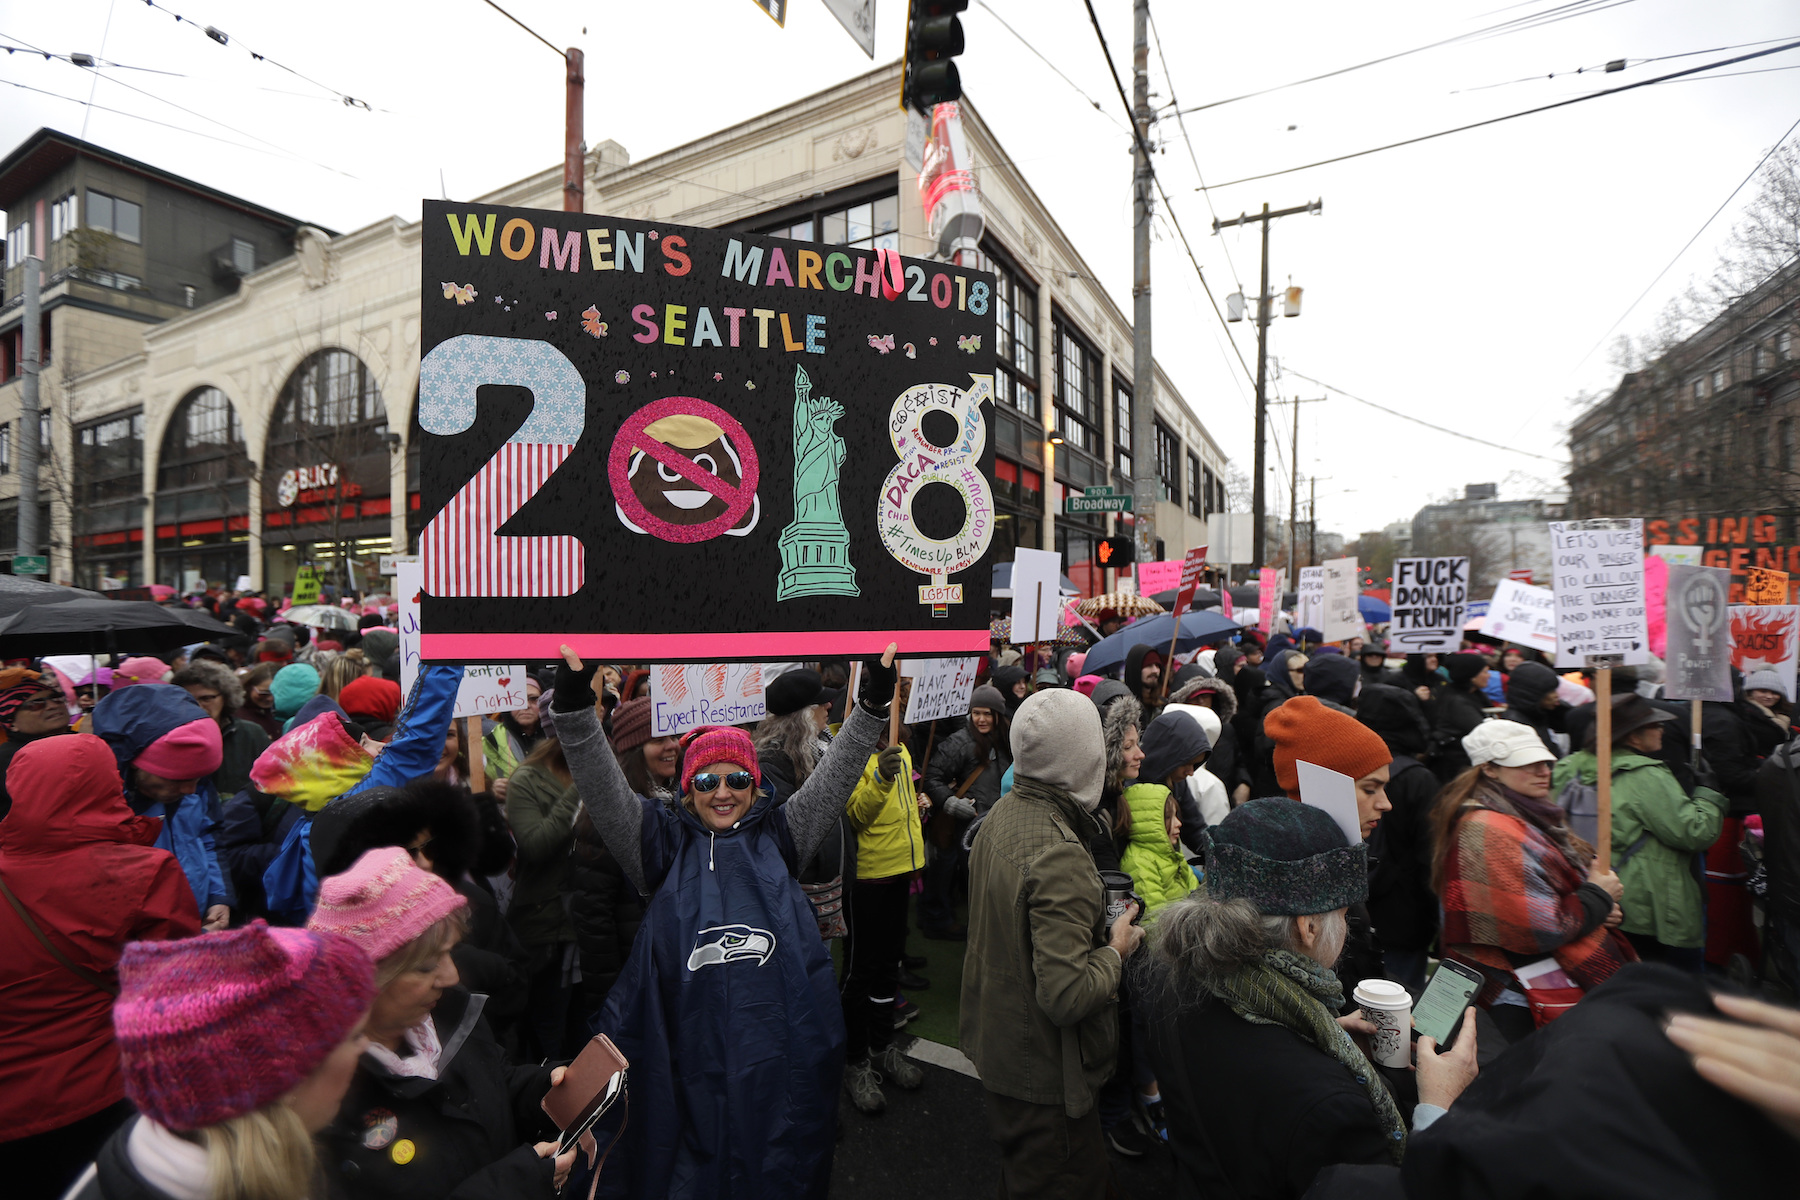 PHOTOS: Women's marches across the country | abc7.com1800 x 1200